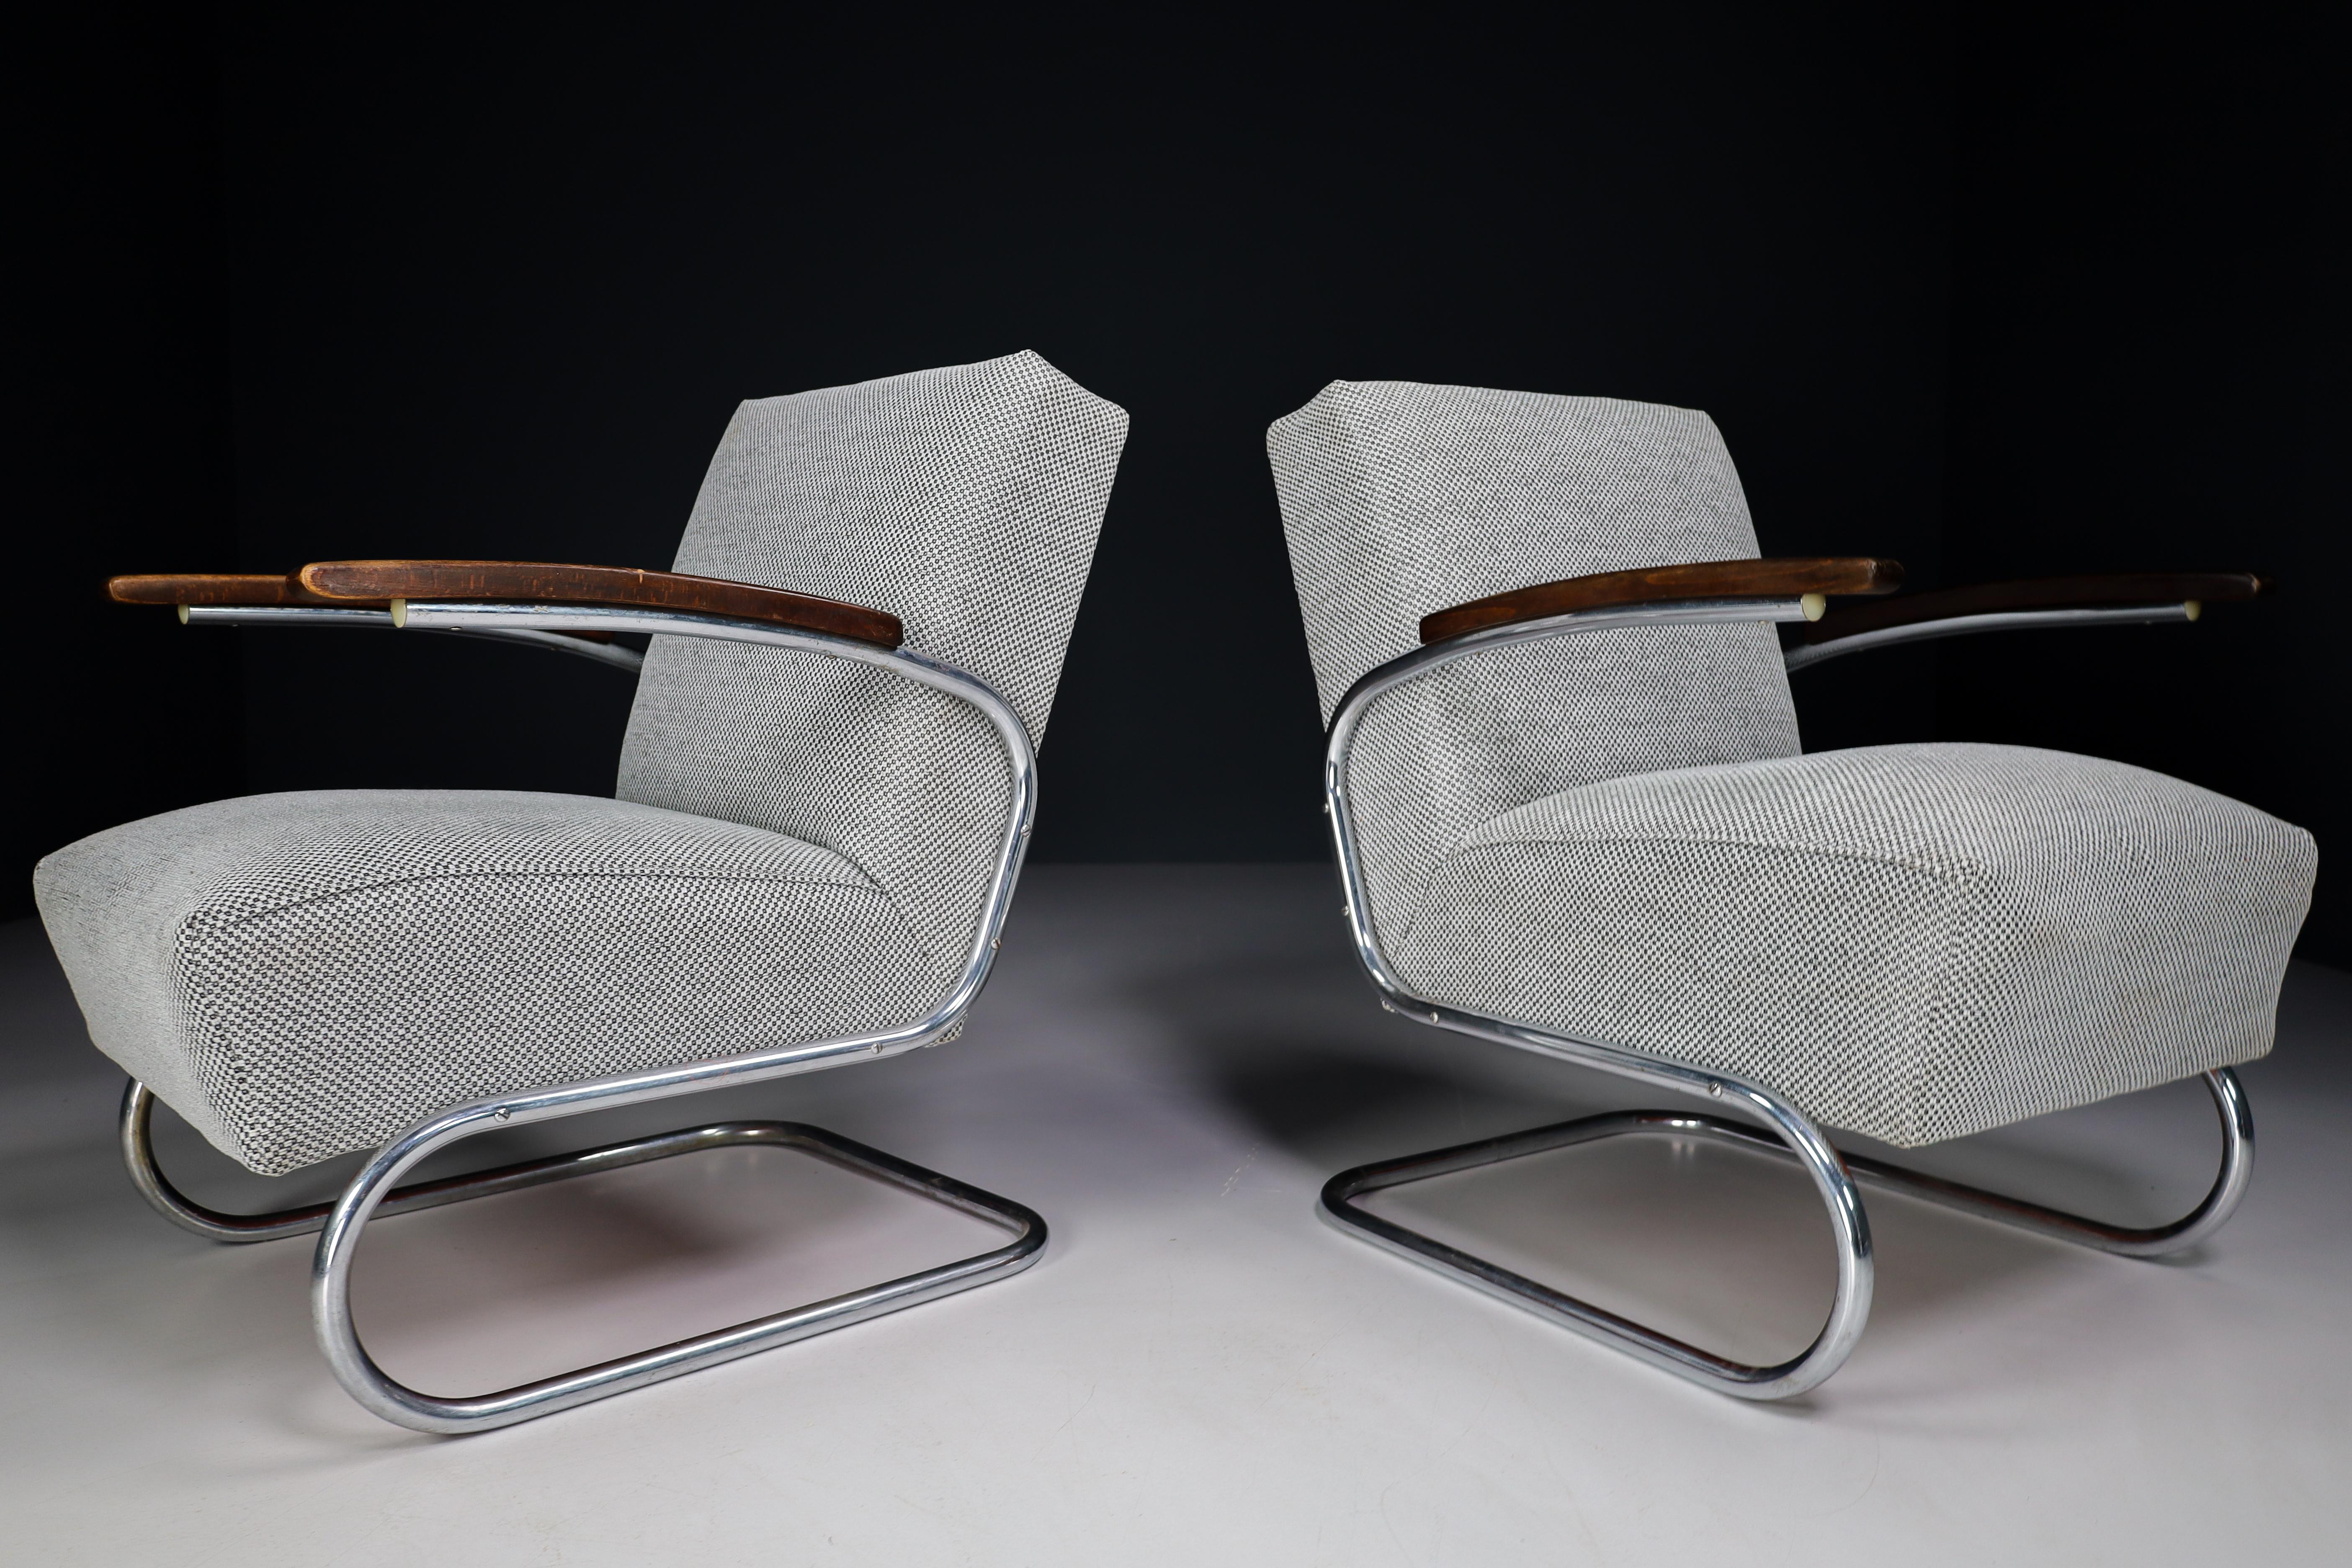 Midcentury Bauhaus Chrome Steel Armchairs by Thonet, circa 1930s For Sale